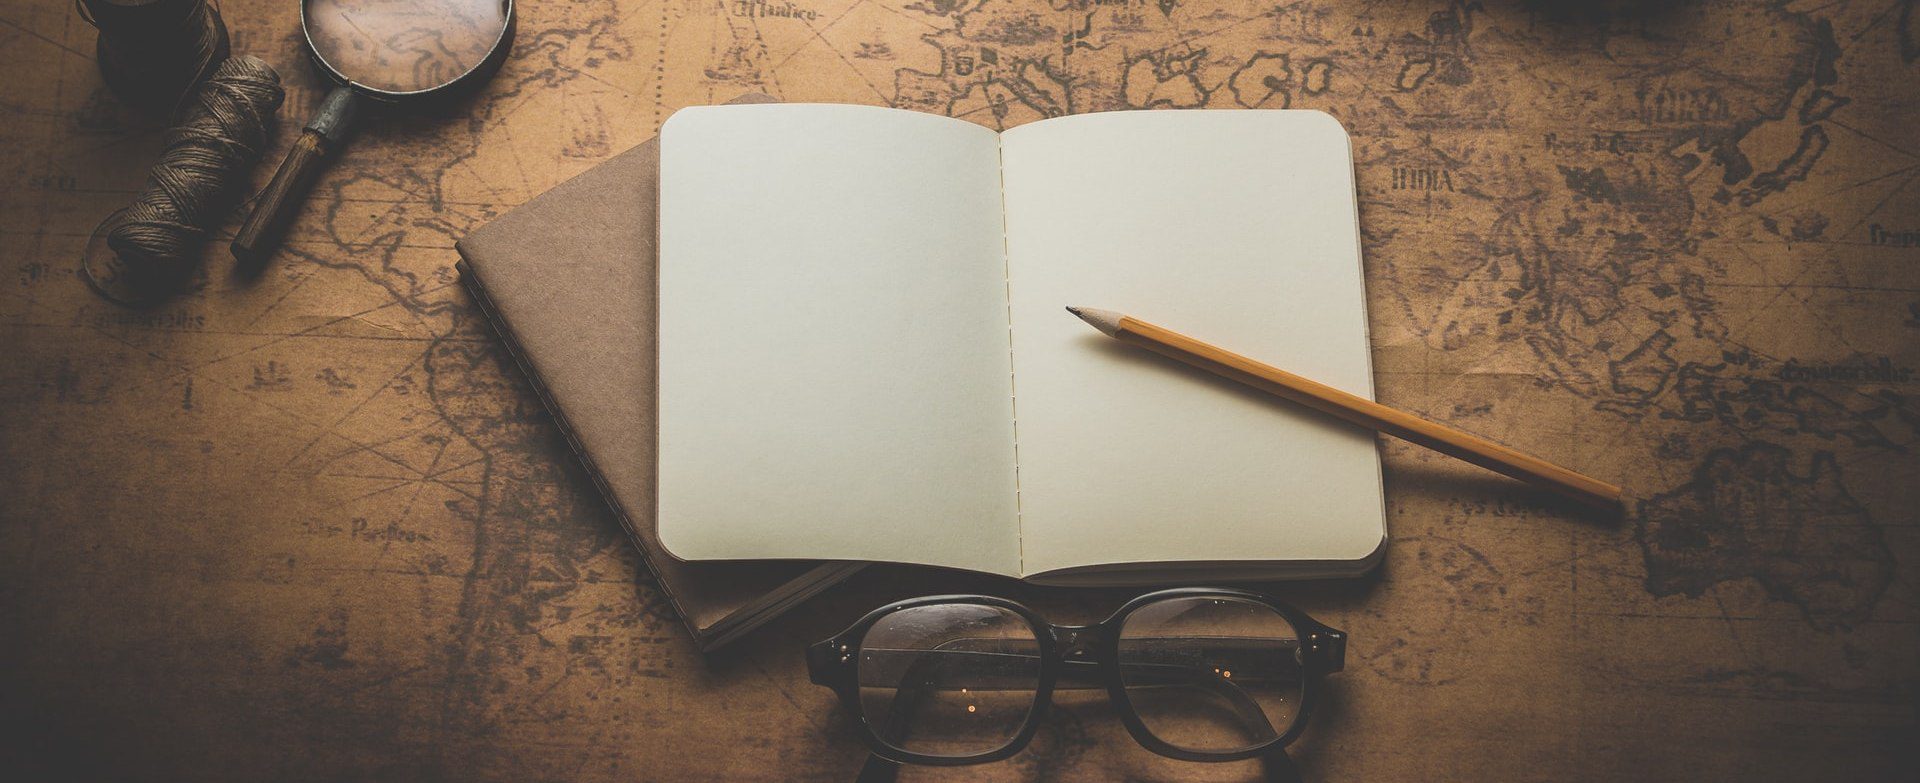 Blank Journal, Reading Glasses, And Magnifying Glass